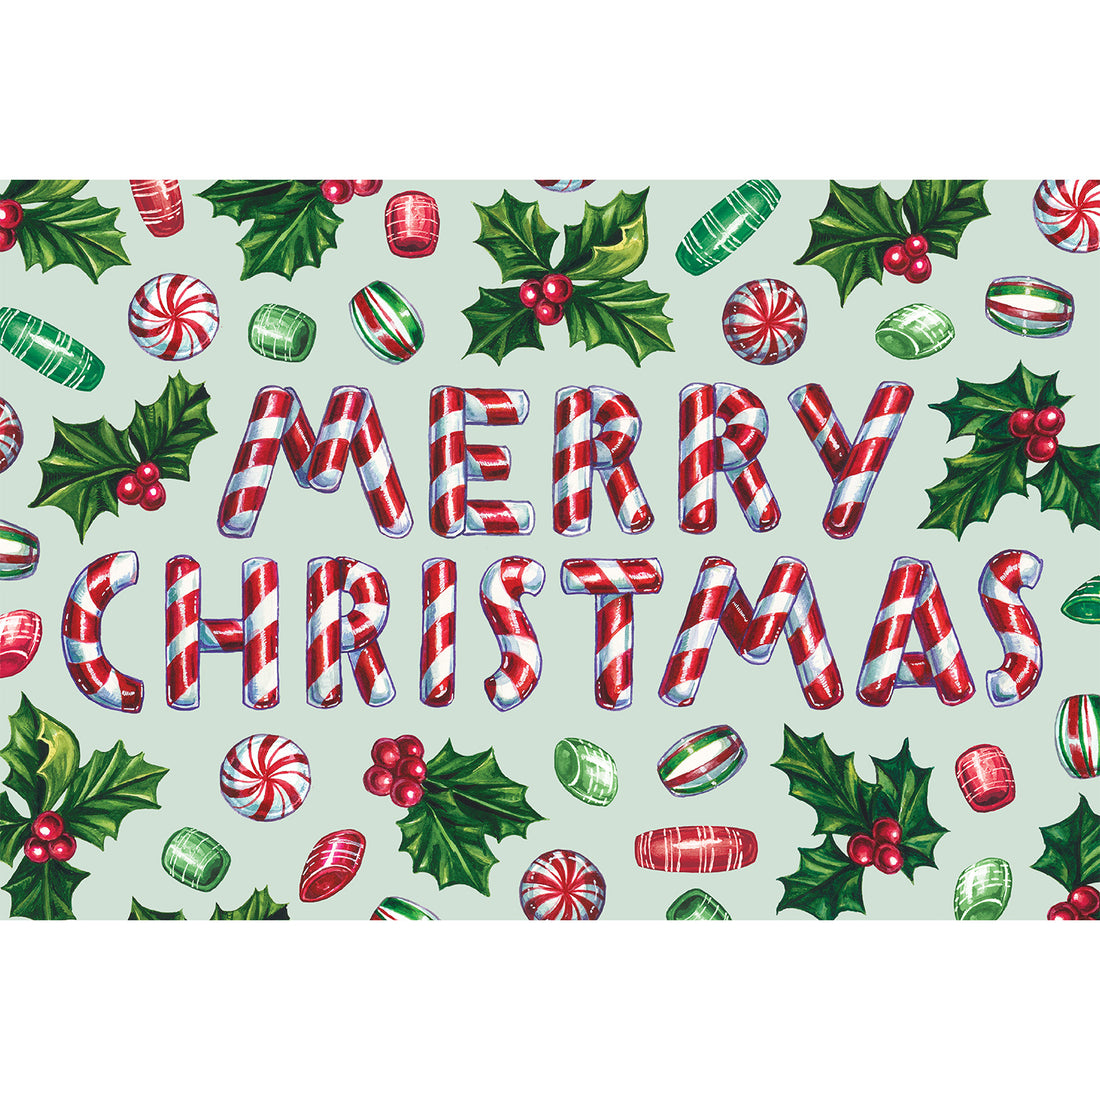 A festive illustration of the words &quot;MERRY CHRISTMAS&quot; spelled with red and white peppermint sticks, surrounded by a scatter of red and green candies and sprigs of holly, on a mint green background. 